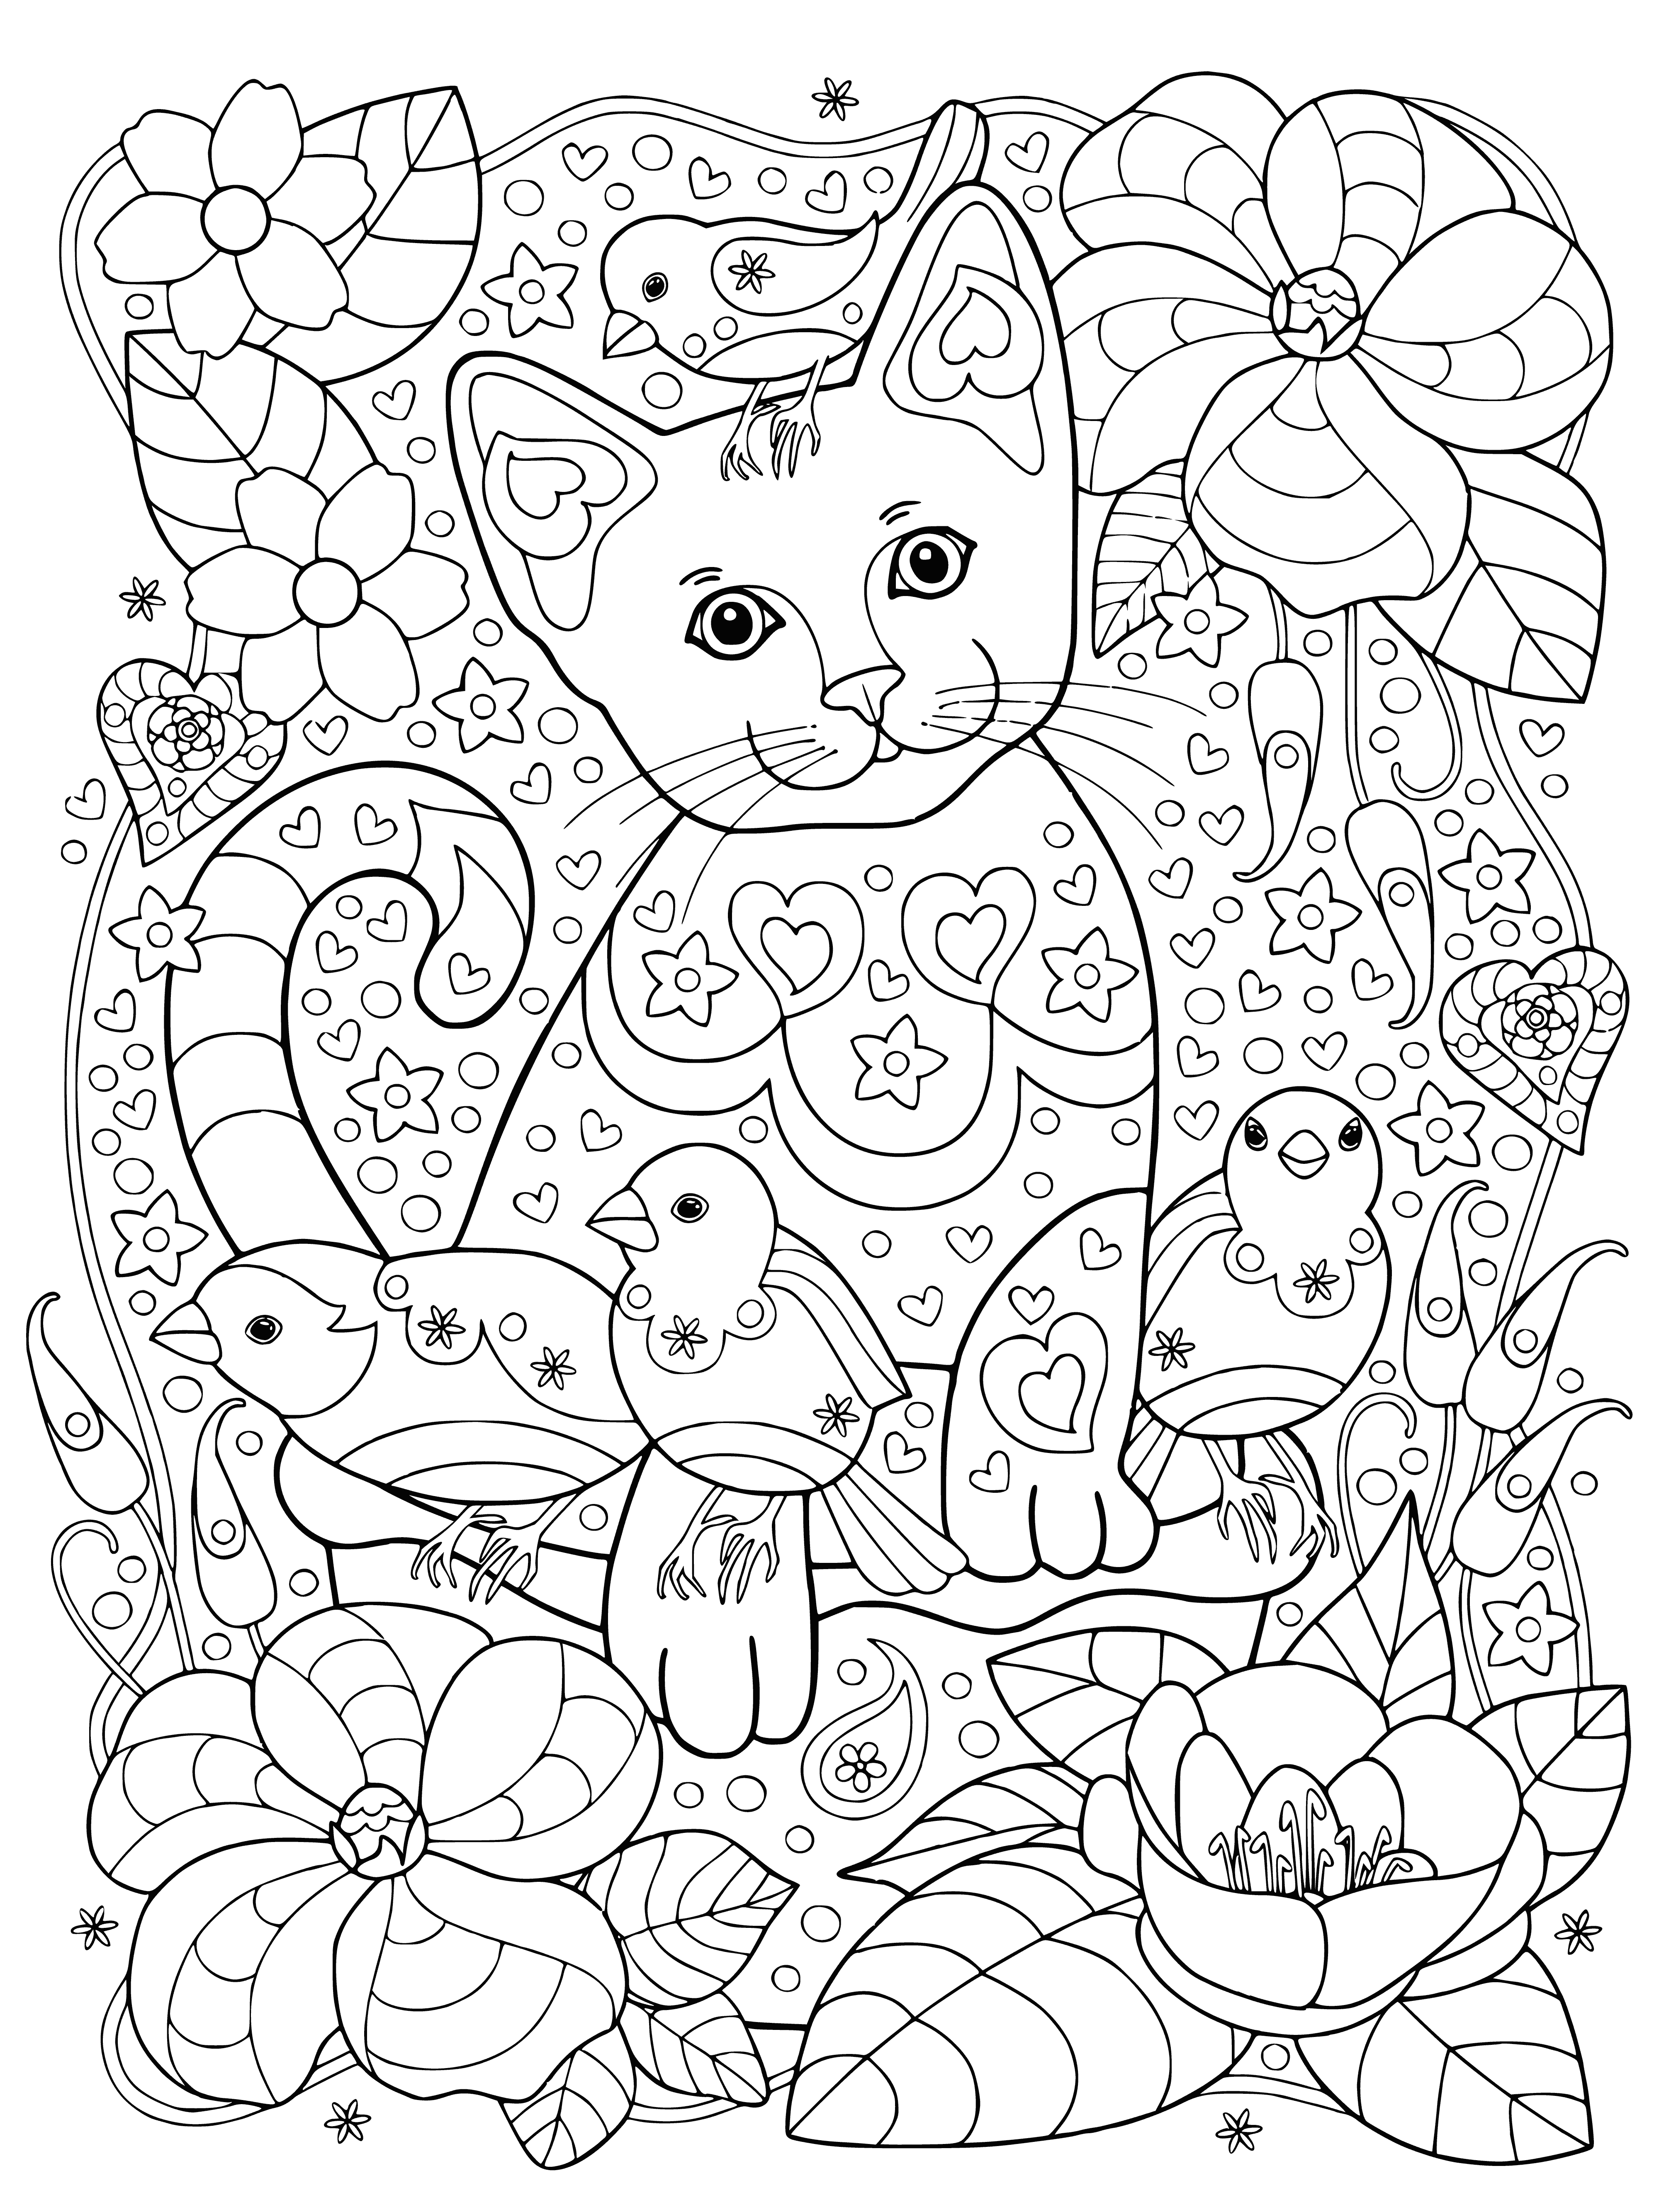 Cat and sparrows coloring page